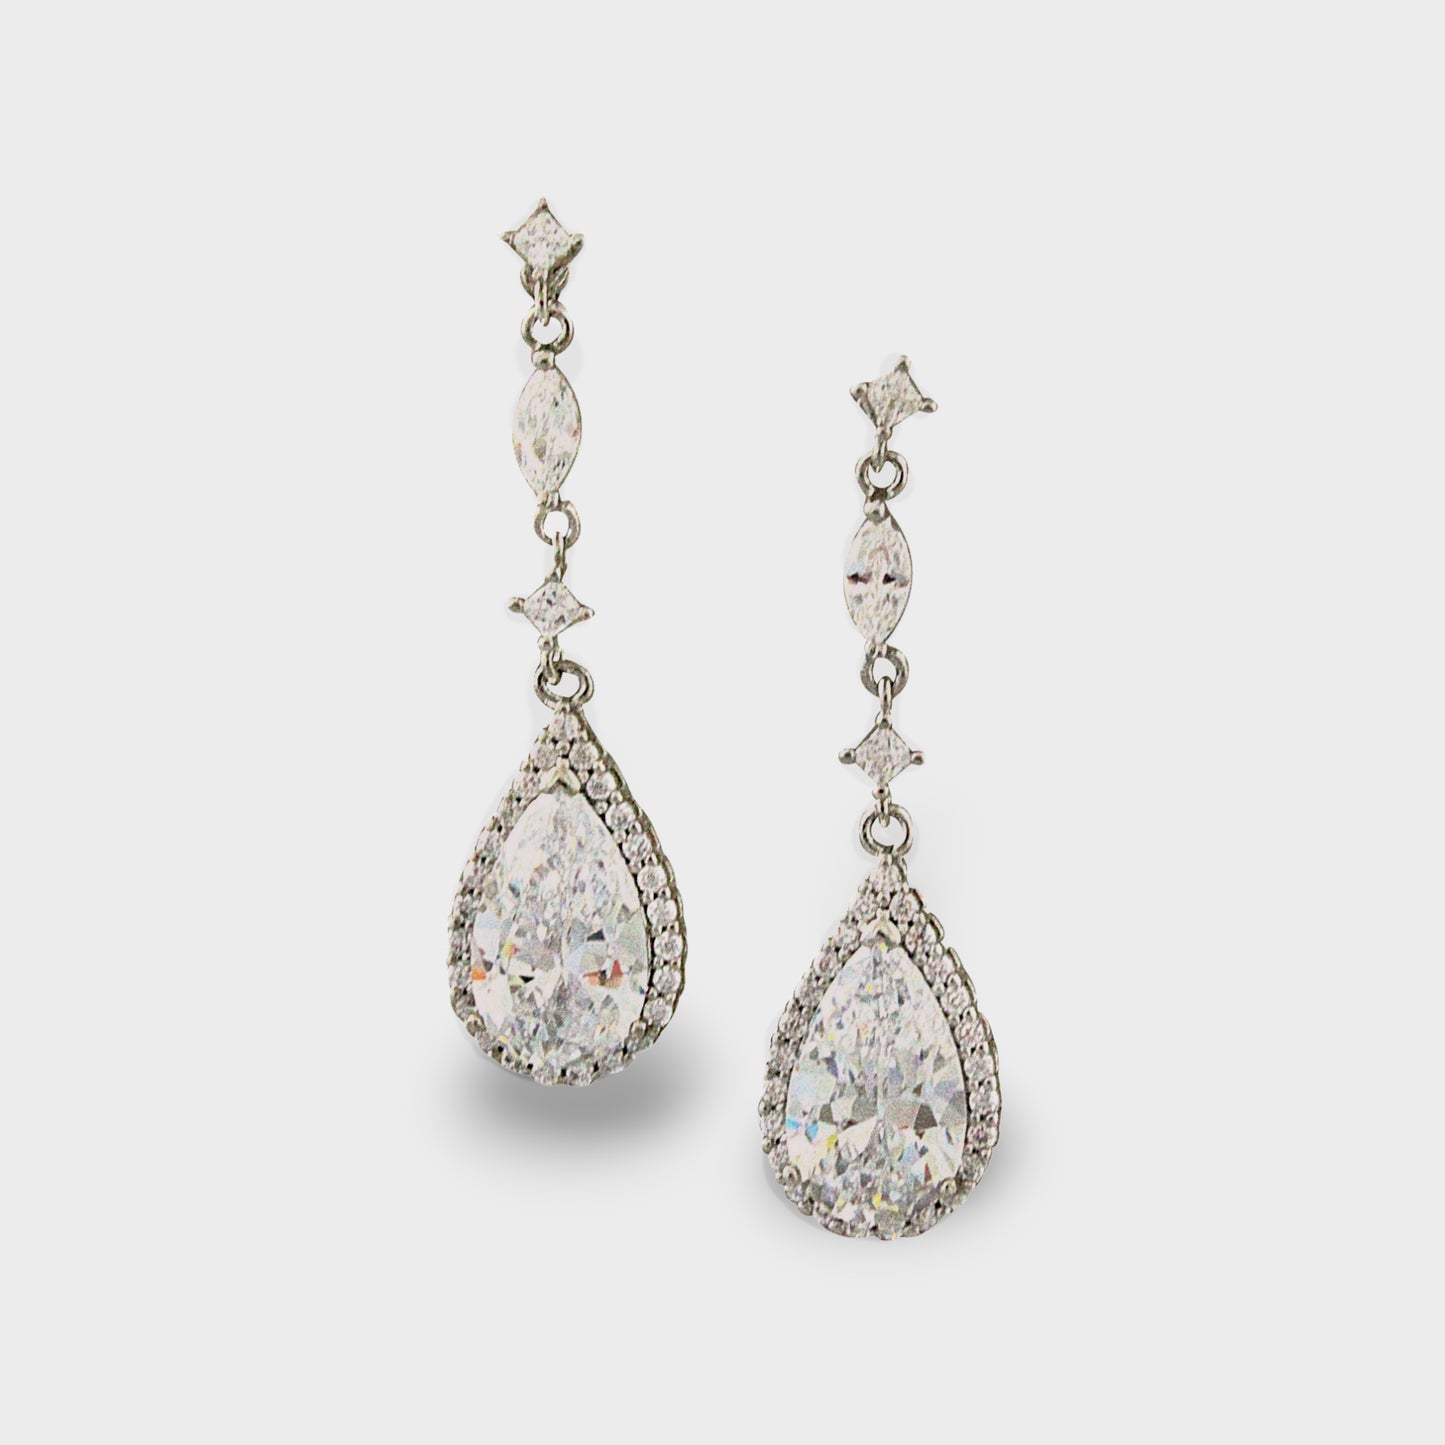 Crystal Linear Drop Earrings Dangle Teardrop Bridal Earrings Silver Chandelier Earrings Art Deco CZ Wedding Jewelry Bridesmaid Gift, BIJOU EARRINGS  for Her, for Bride, for Bridesmaid, for Mother of the Bride or for Guest by Camilla Christine Bridal Jewelry and Wedding Accessories Bridal Style Inspiration Trends for Bride